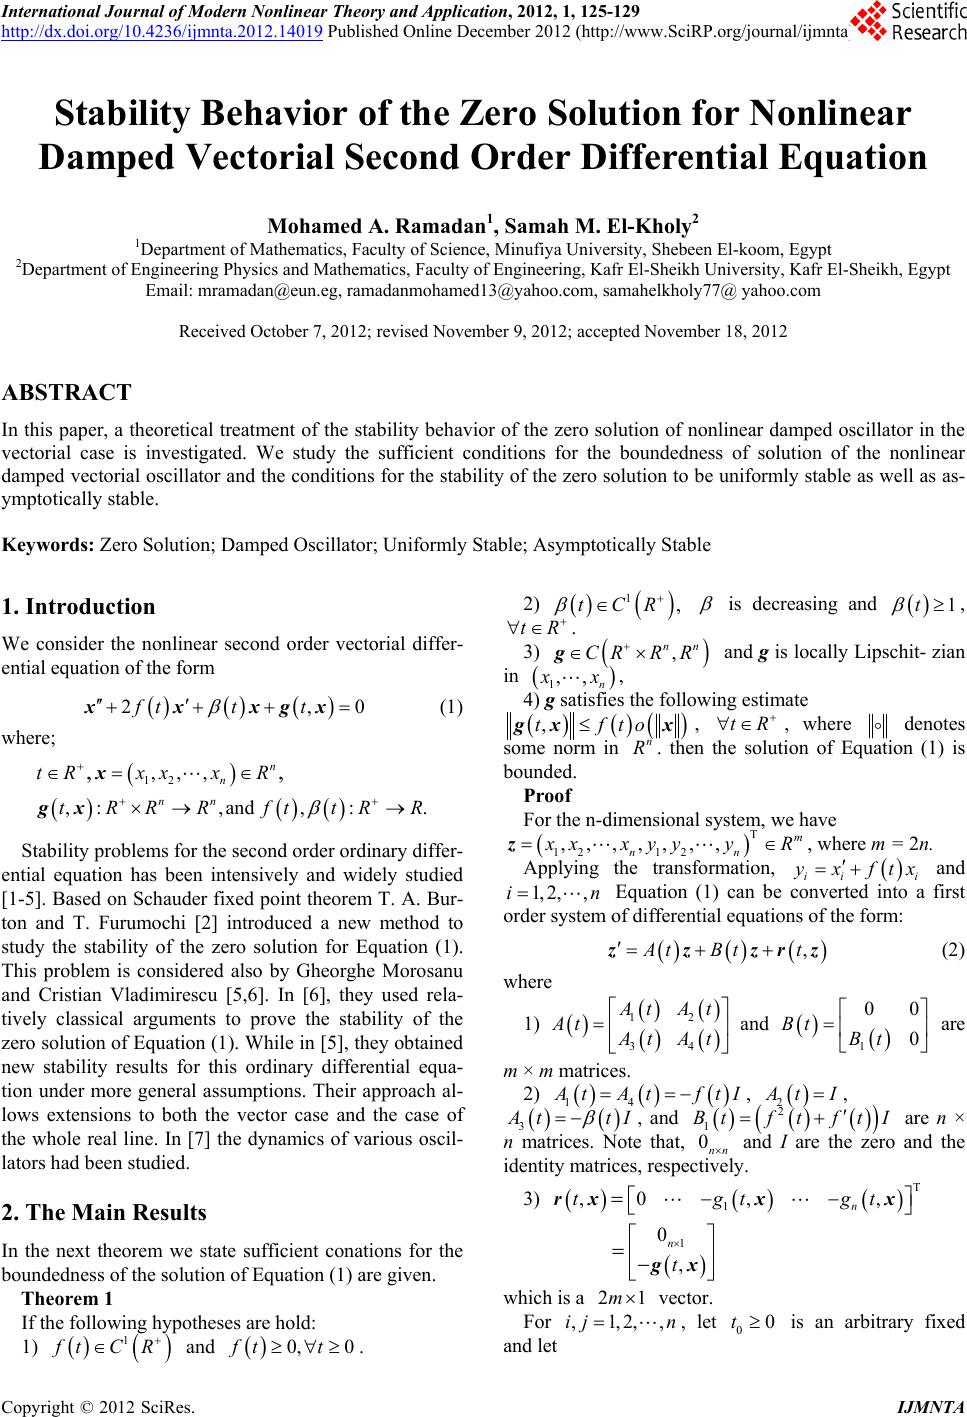 Stability Behavior Of The Zero Solution For Nonlinear Damped Vectorial Second Order Differential Equation